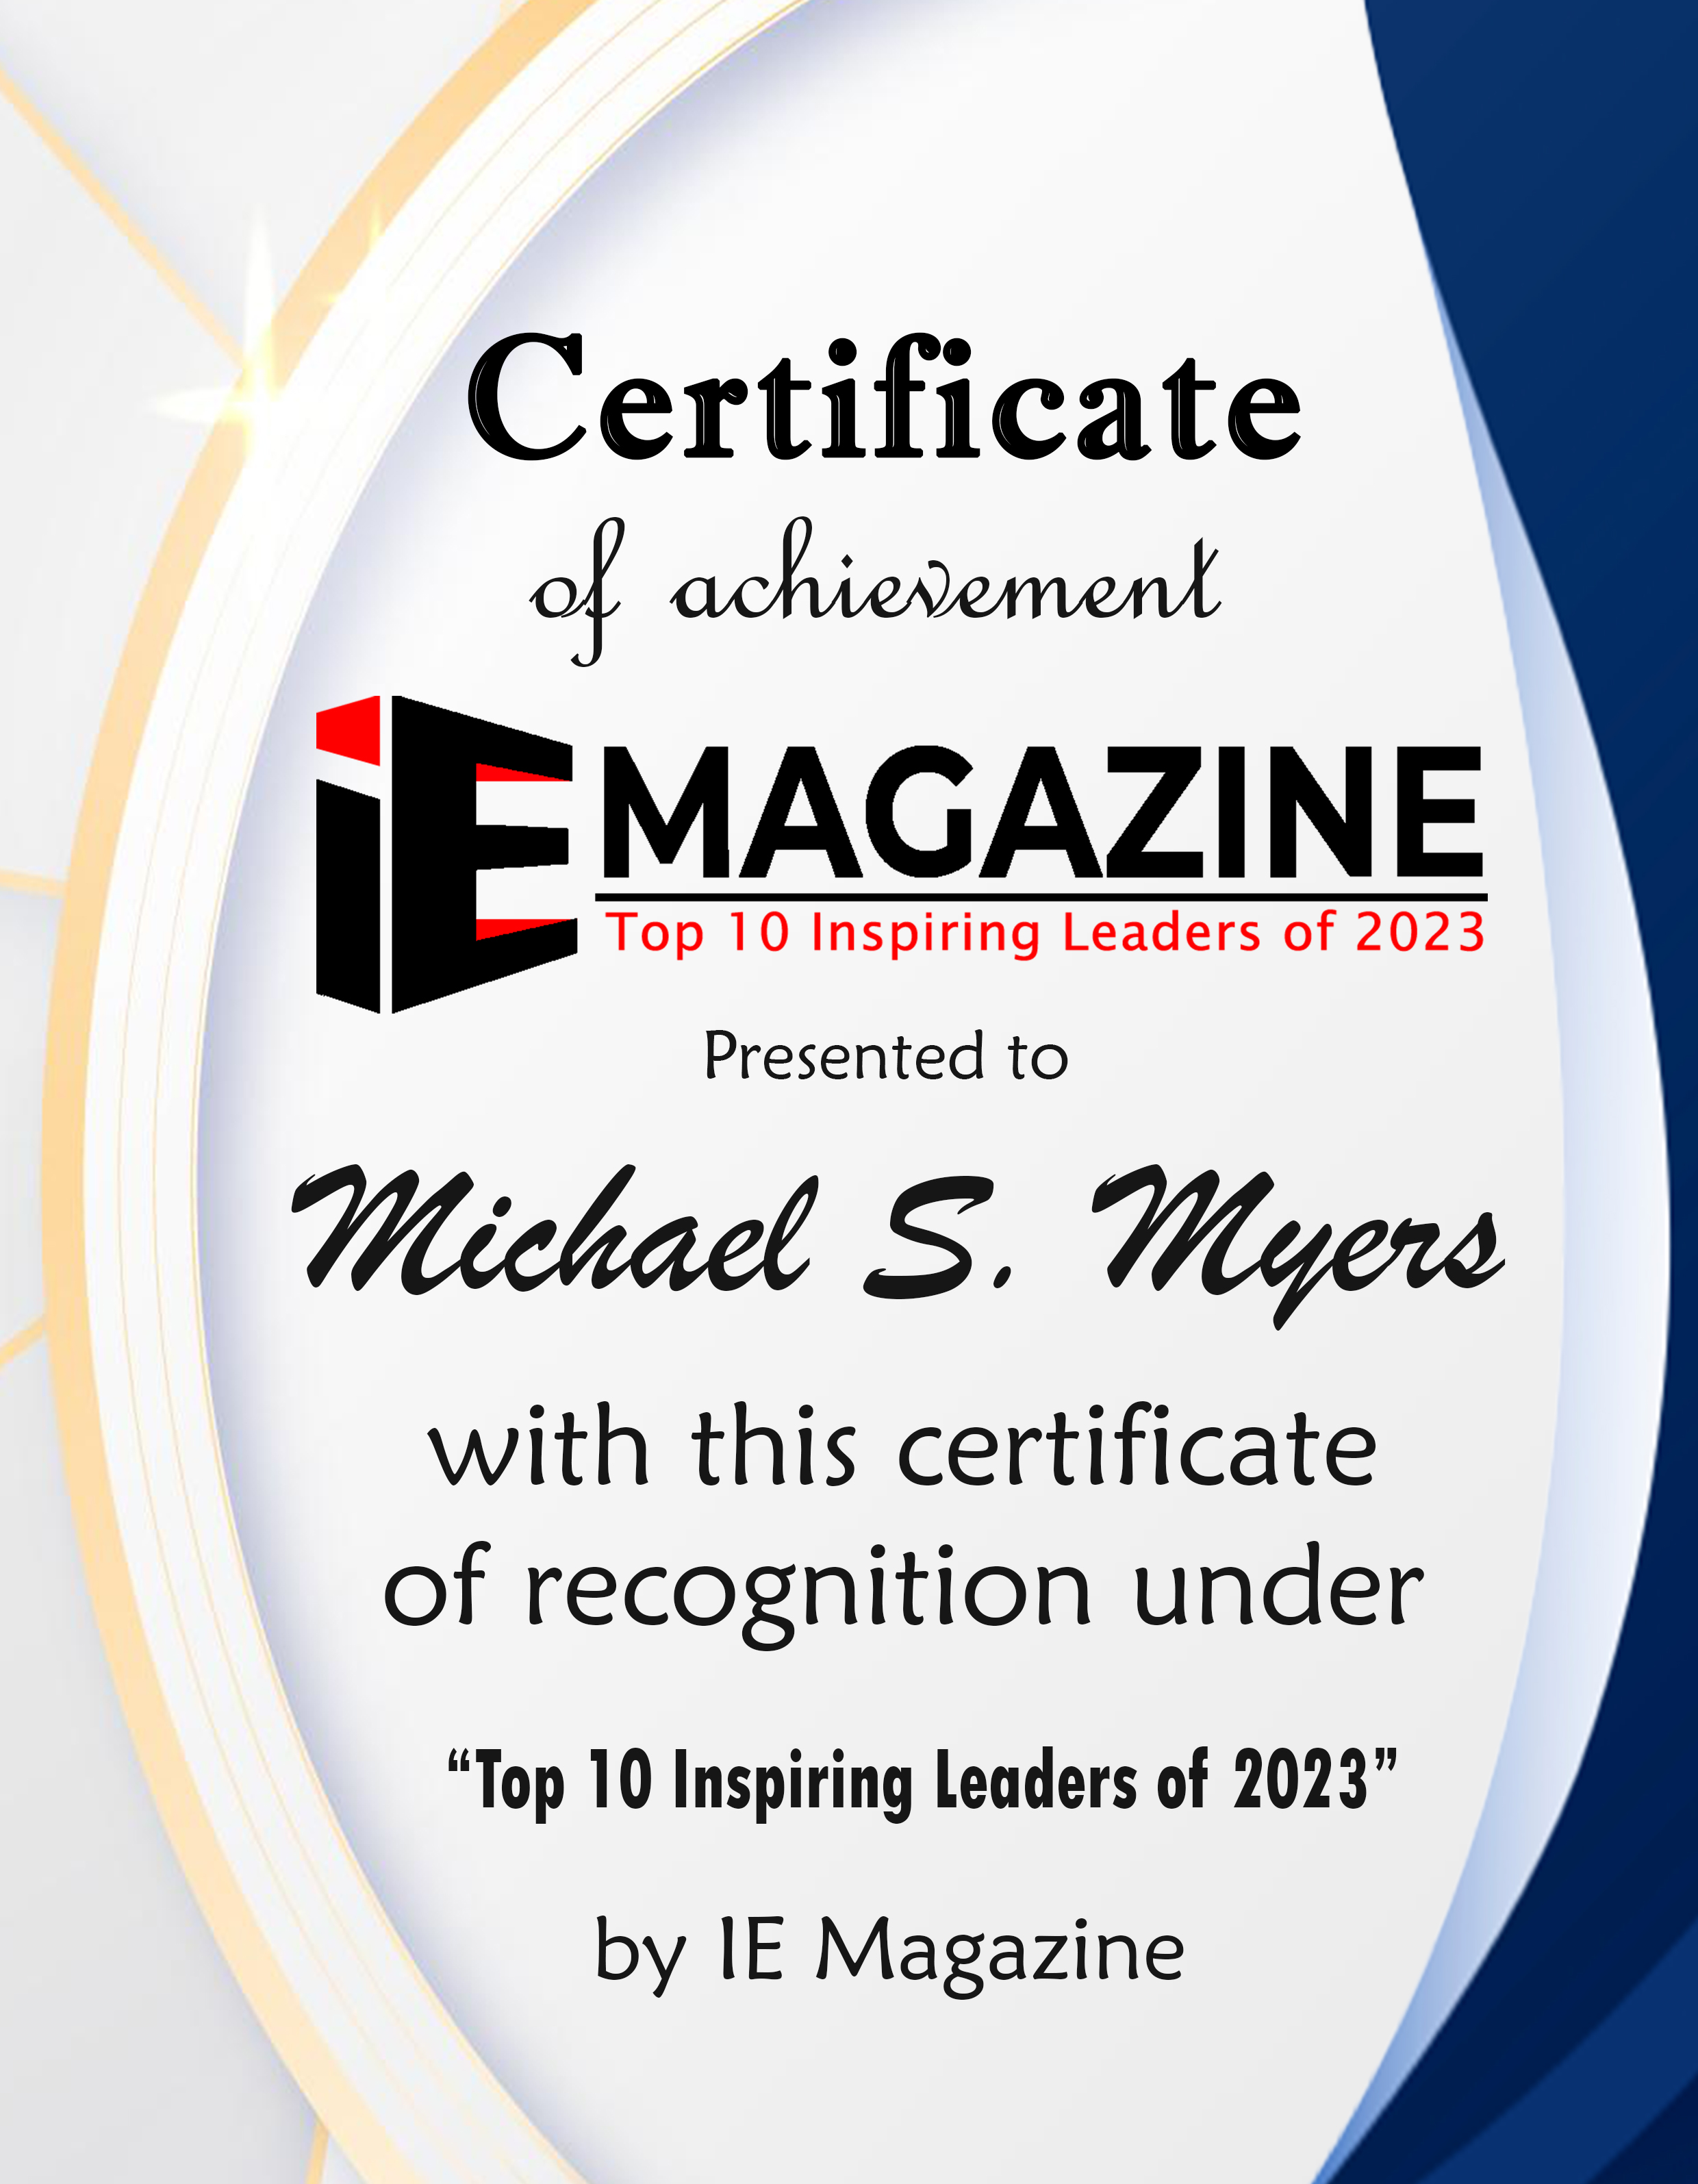 Michael S. Myers, Founding Partner of Papazian Heisey Myers (PHM) Certificate